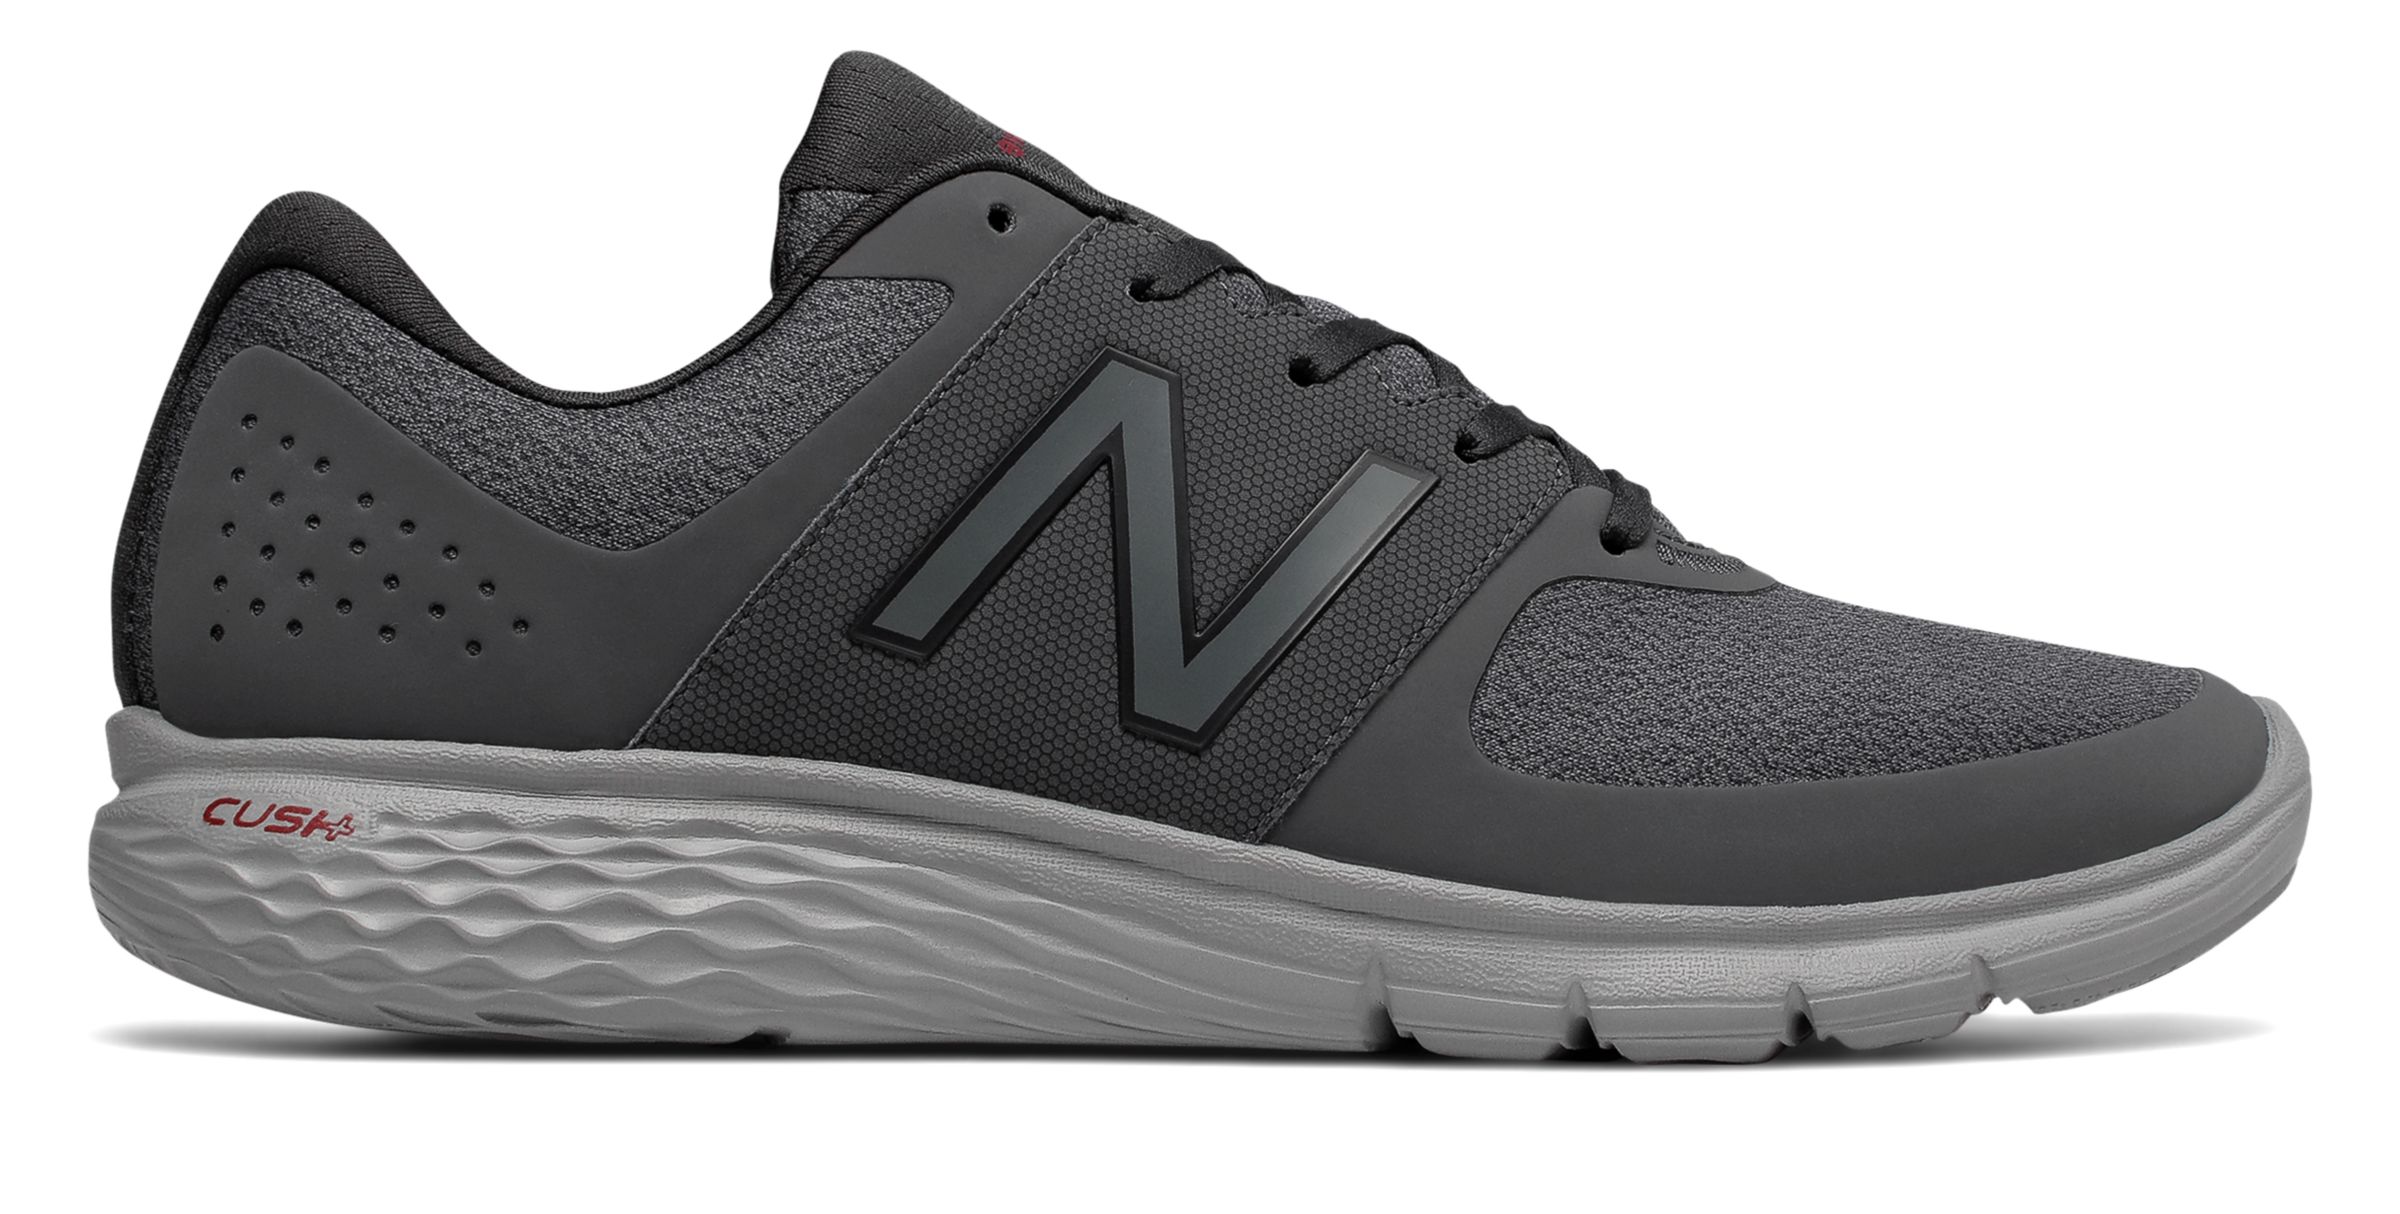 New Balance MA365-V1 on Sale - Discounts Up to 20% Off on MA365GR at Joe's New  Balance Outlet